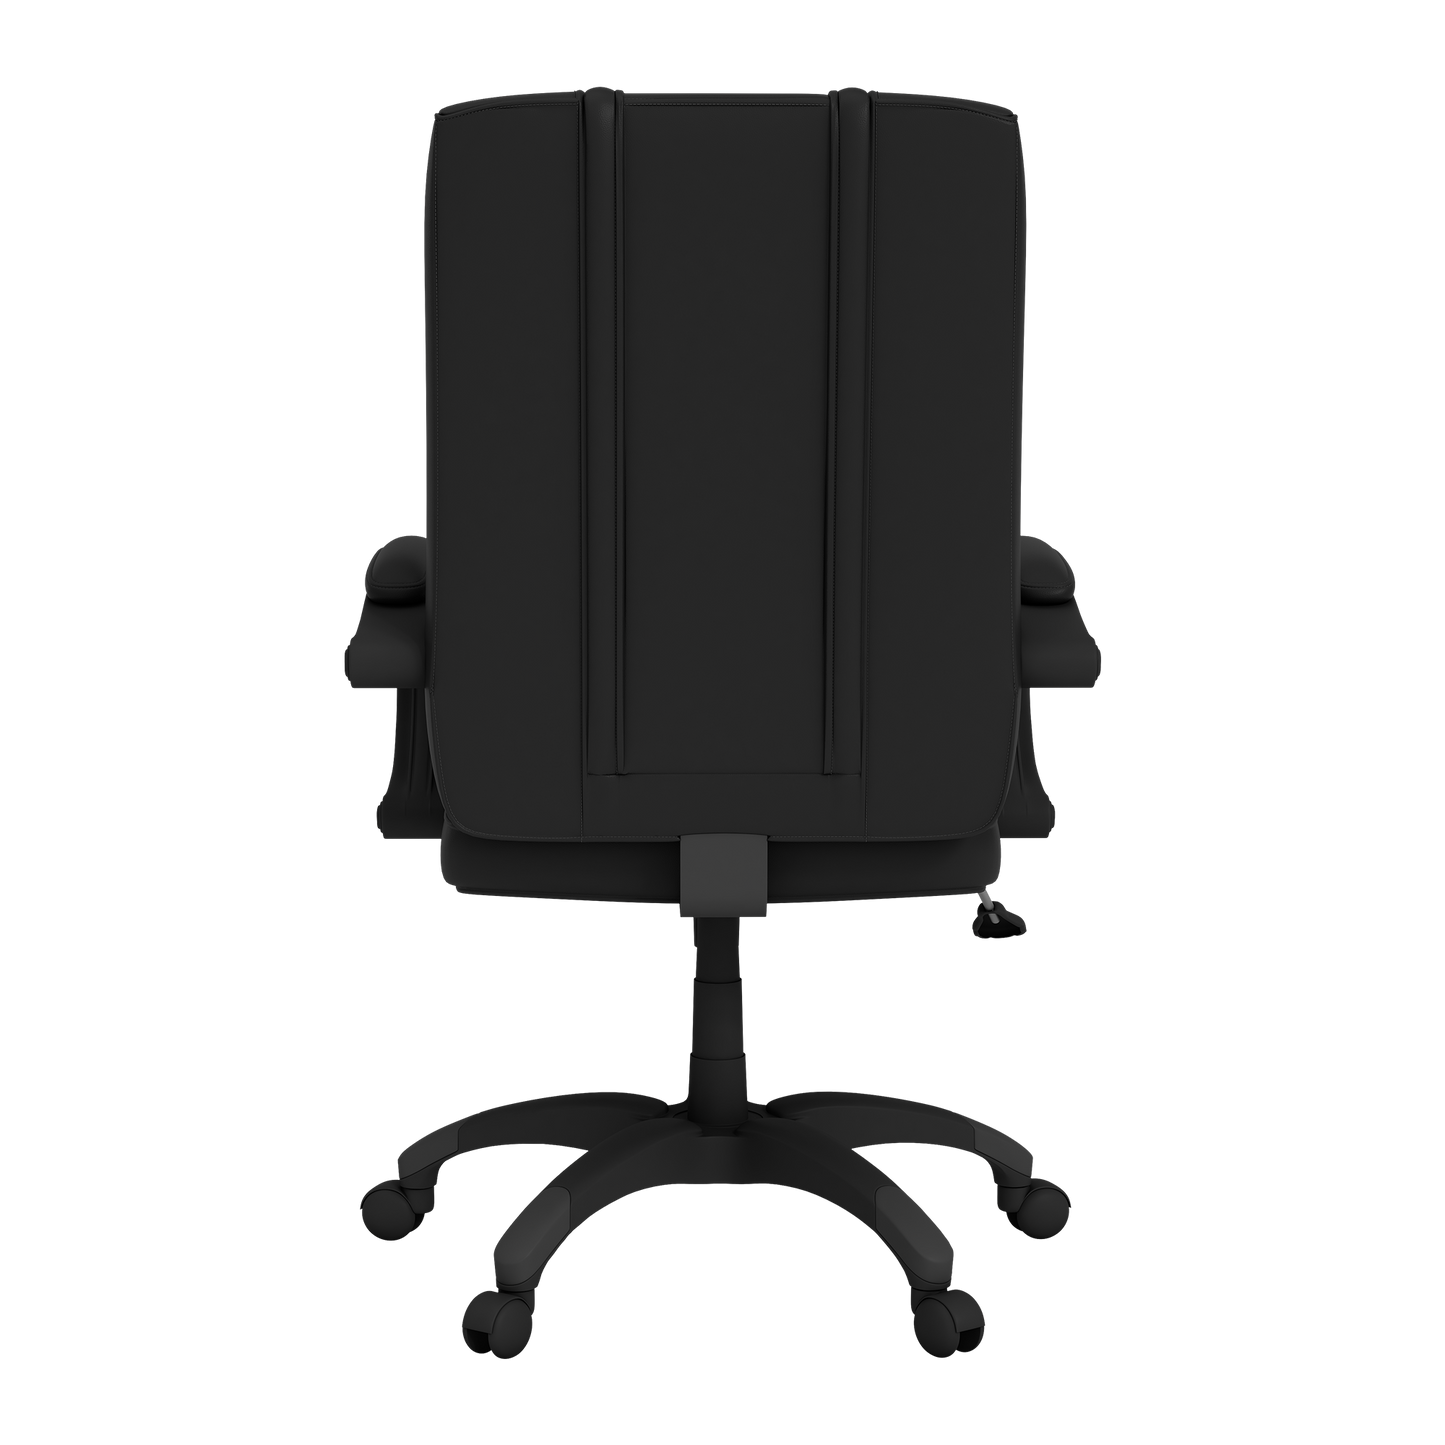 Office Chair 1000 with GMC Alternate Logo